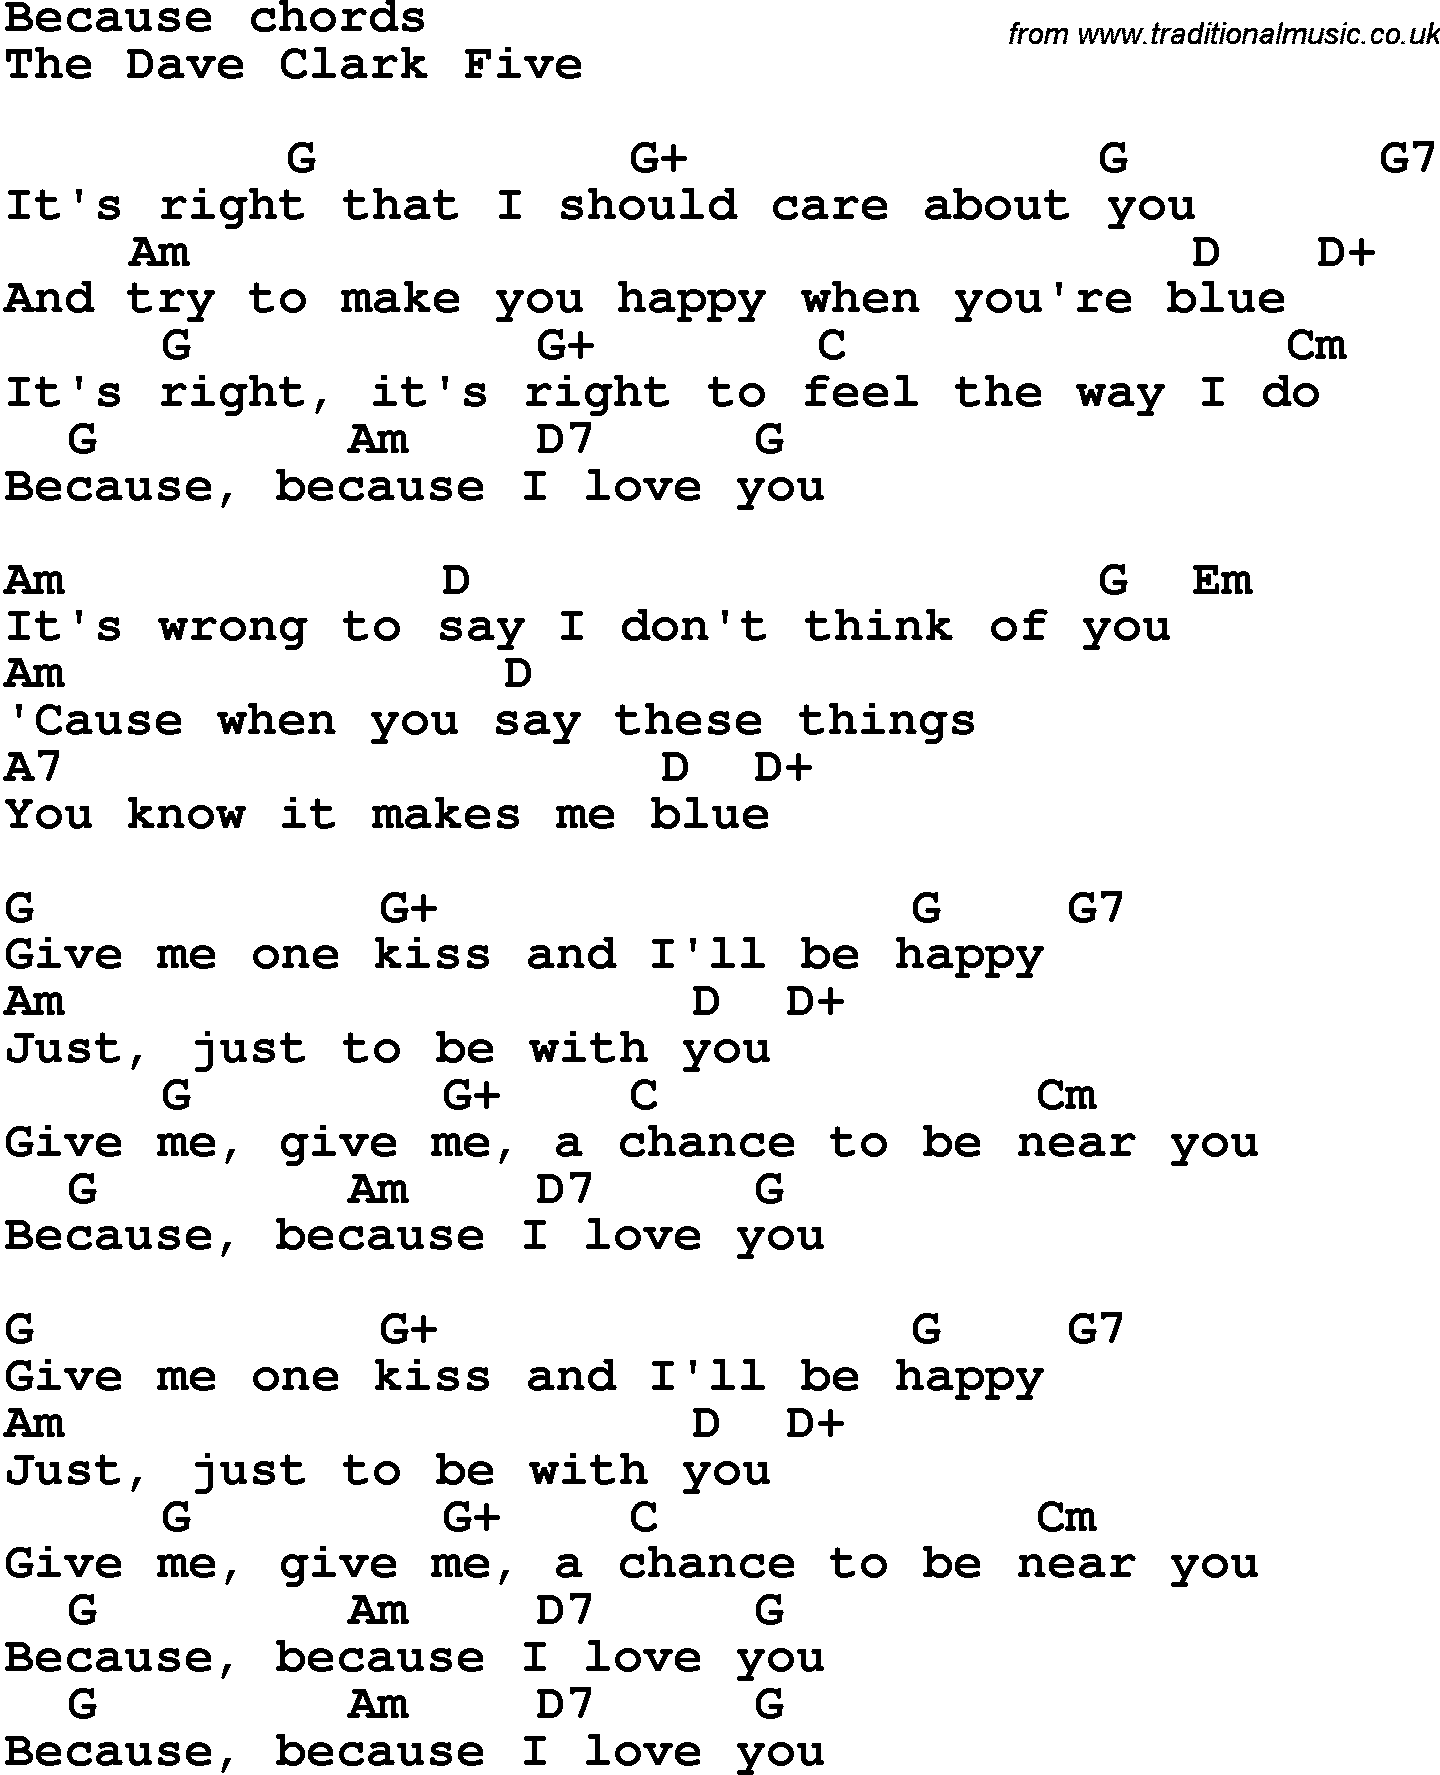 Song Lyrics with guitar chords for Because - The Dave Clark Five